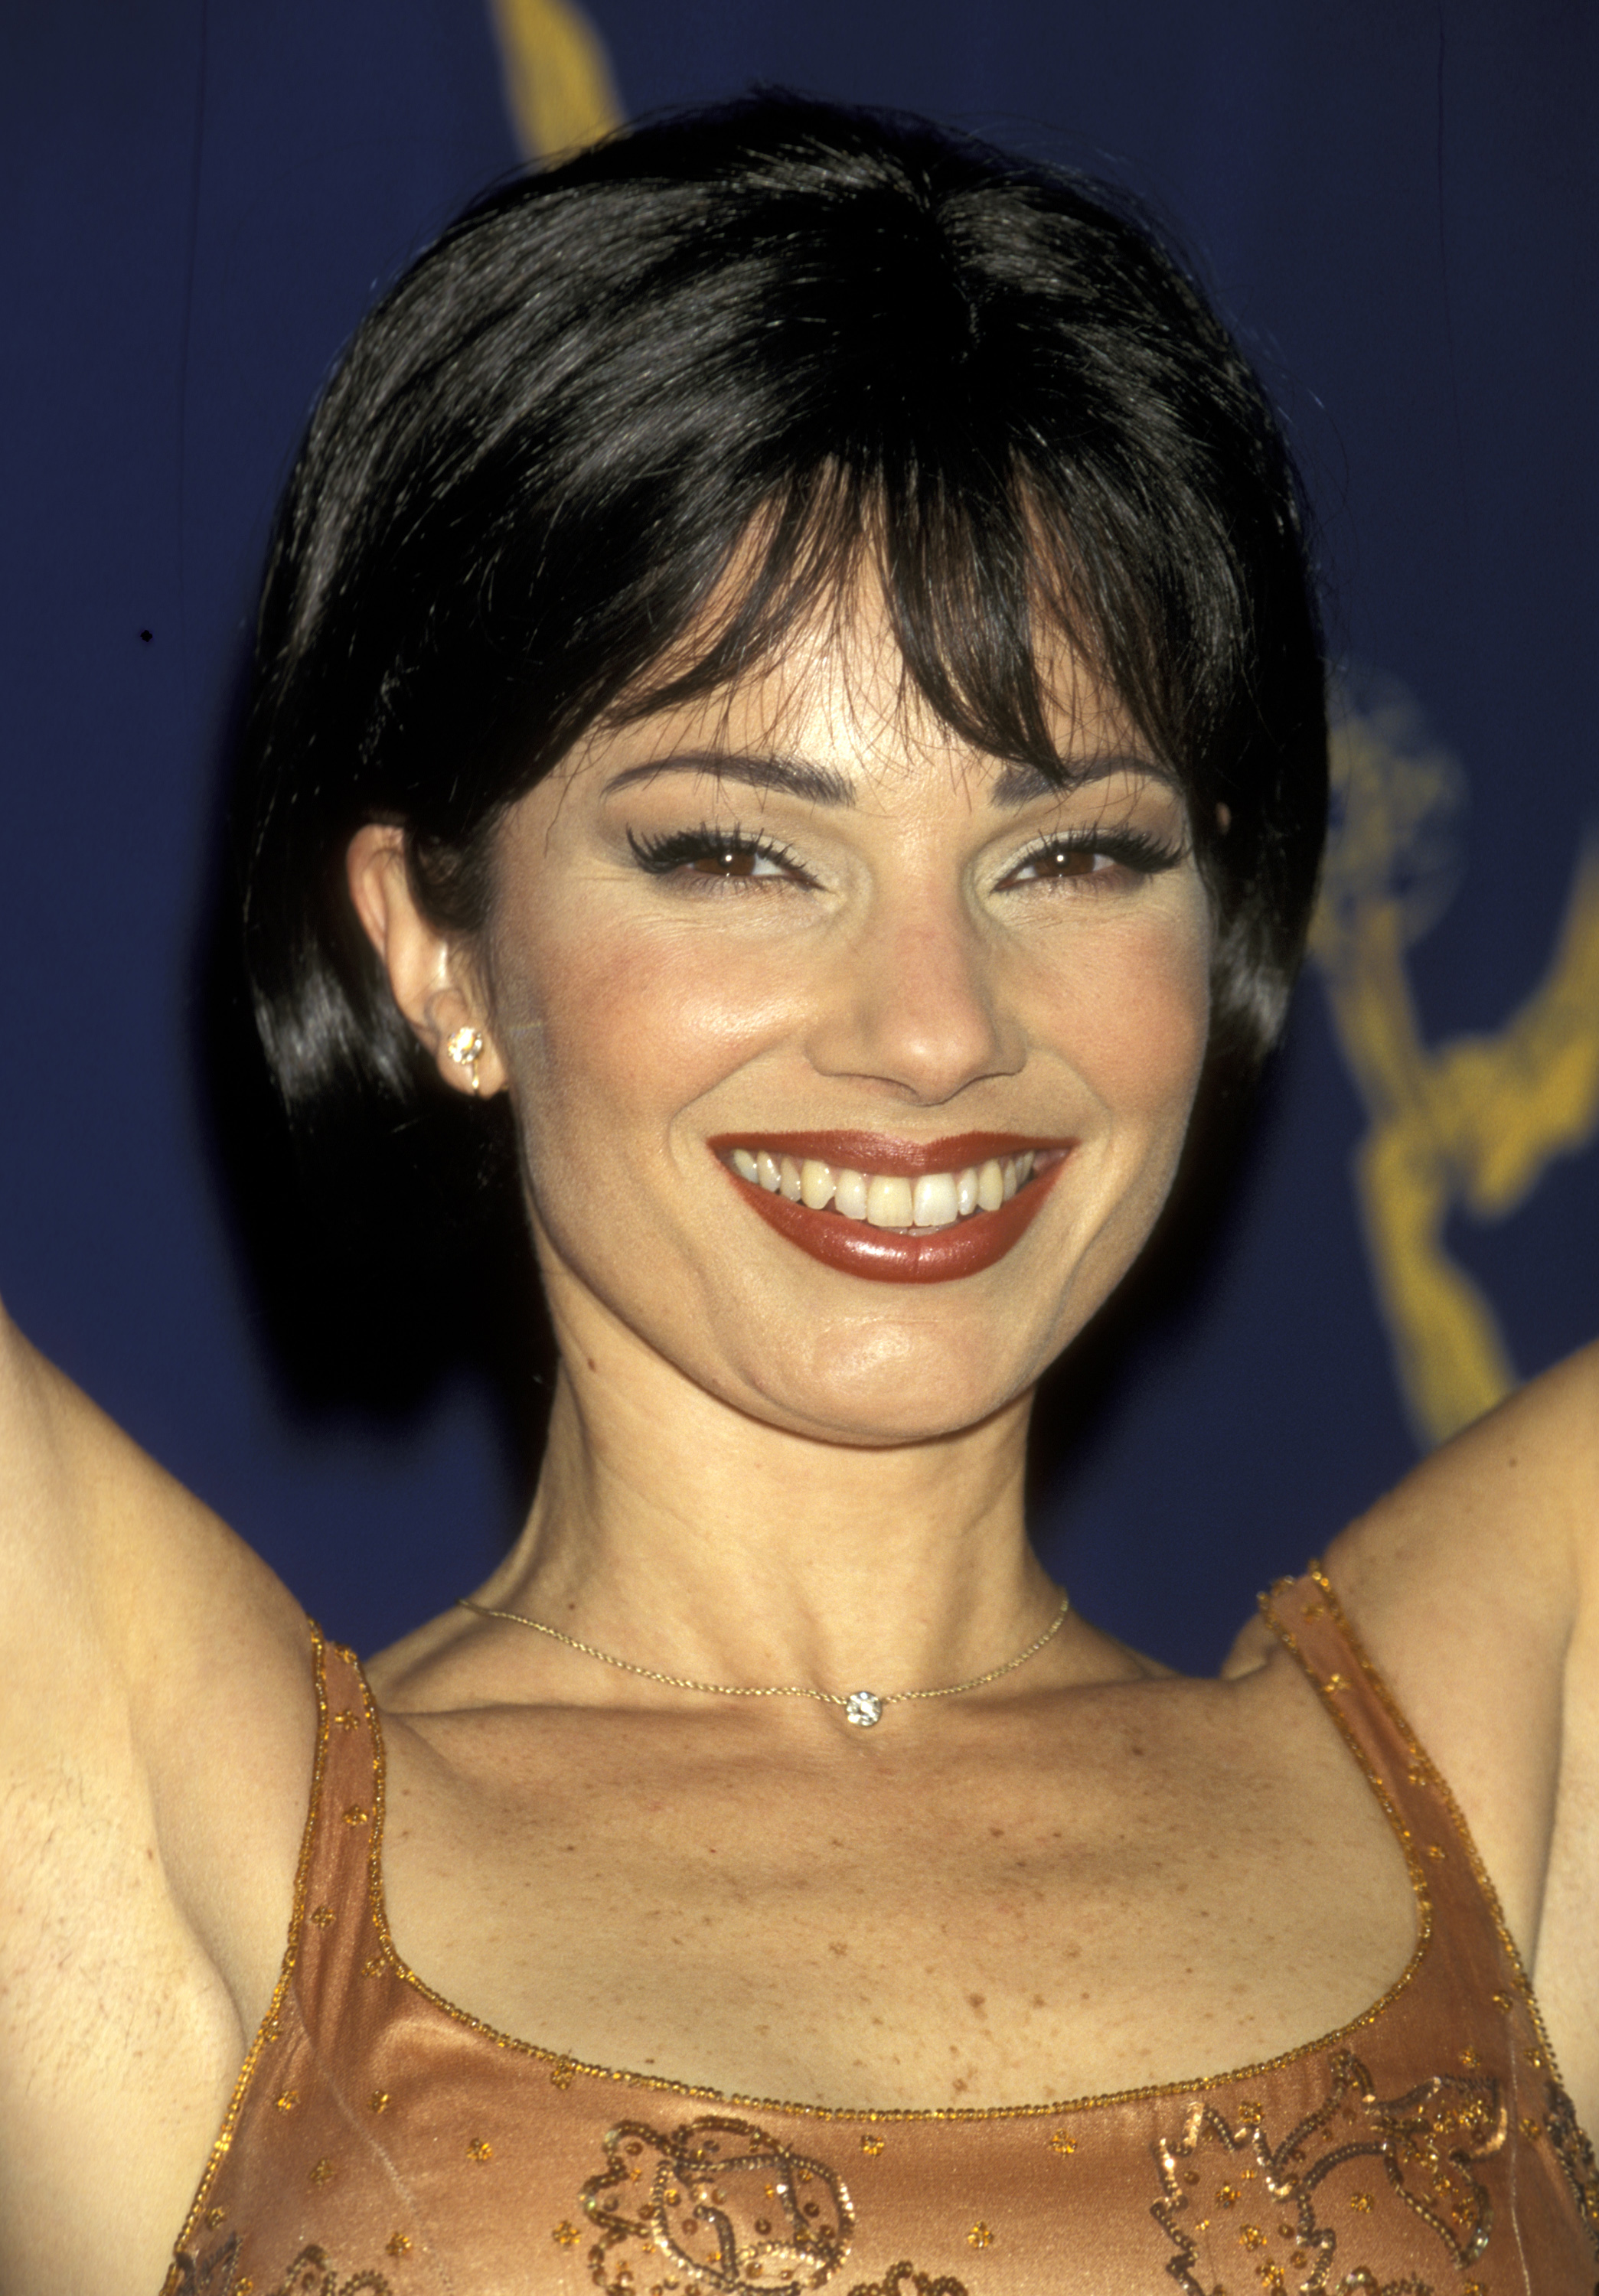 Fran Drescher at the 25th Annual International Emmy Awards hosted at New York Hilton in New York City, NY, on November 24, 1997. | Source: Getty Images